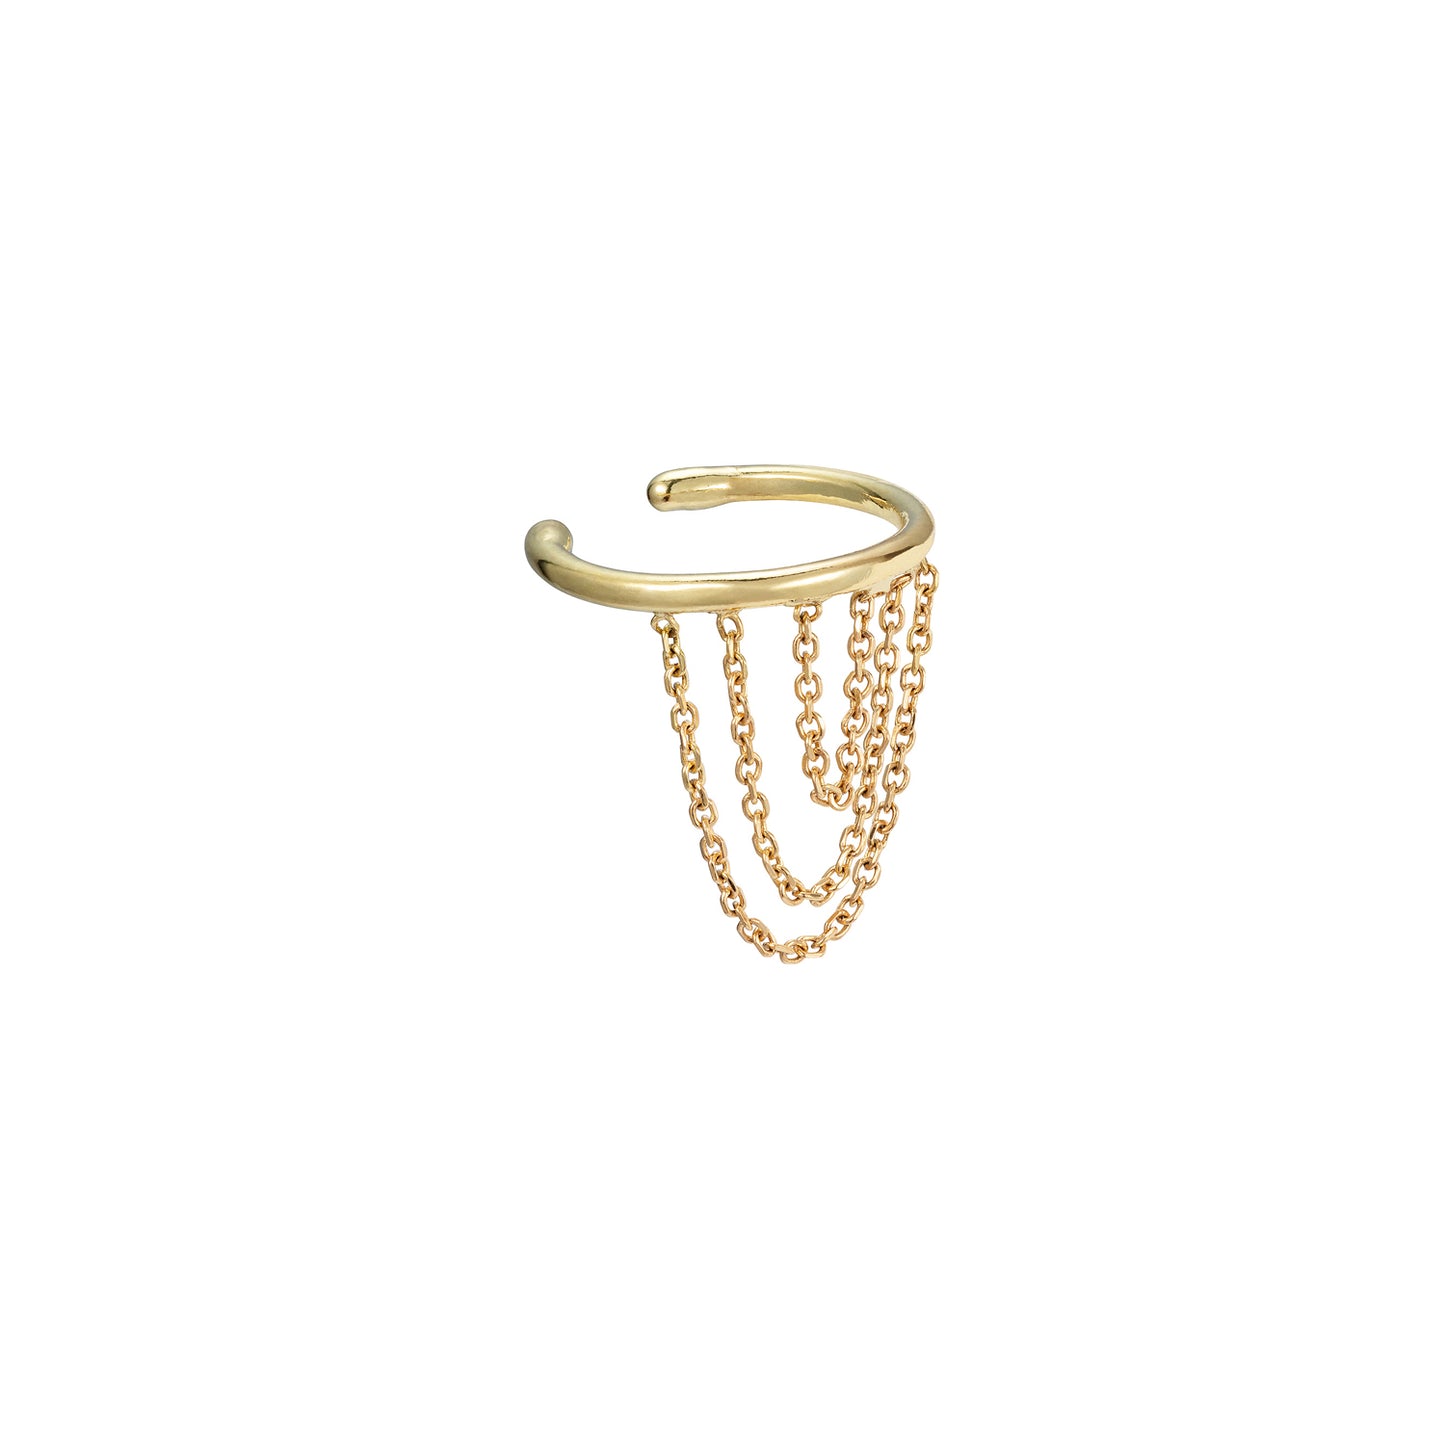 Sweet Pea 18ct yellow gold Nouveau Now cuff with hanging looped chains.